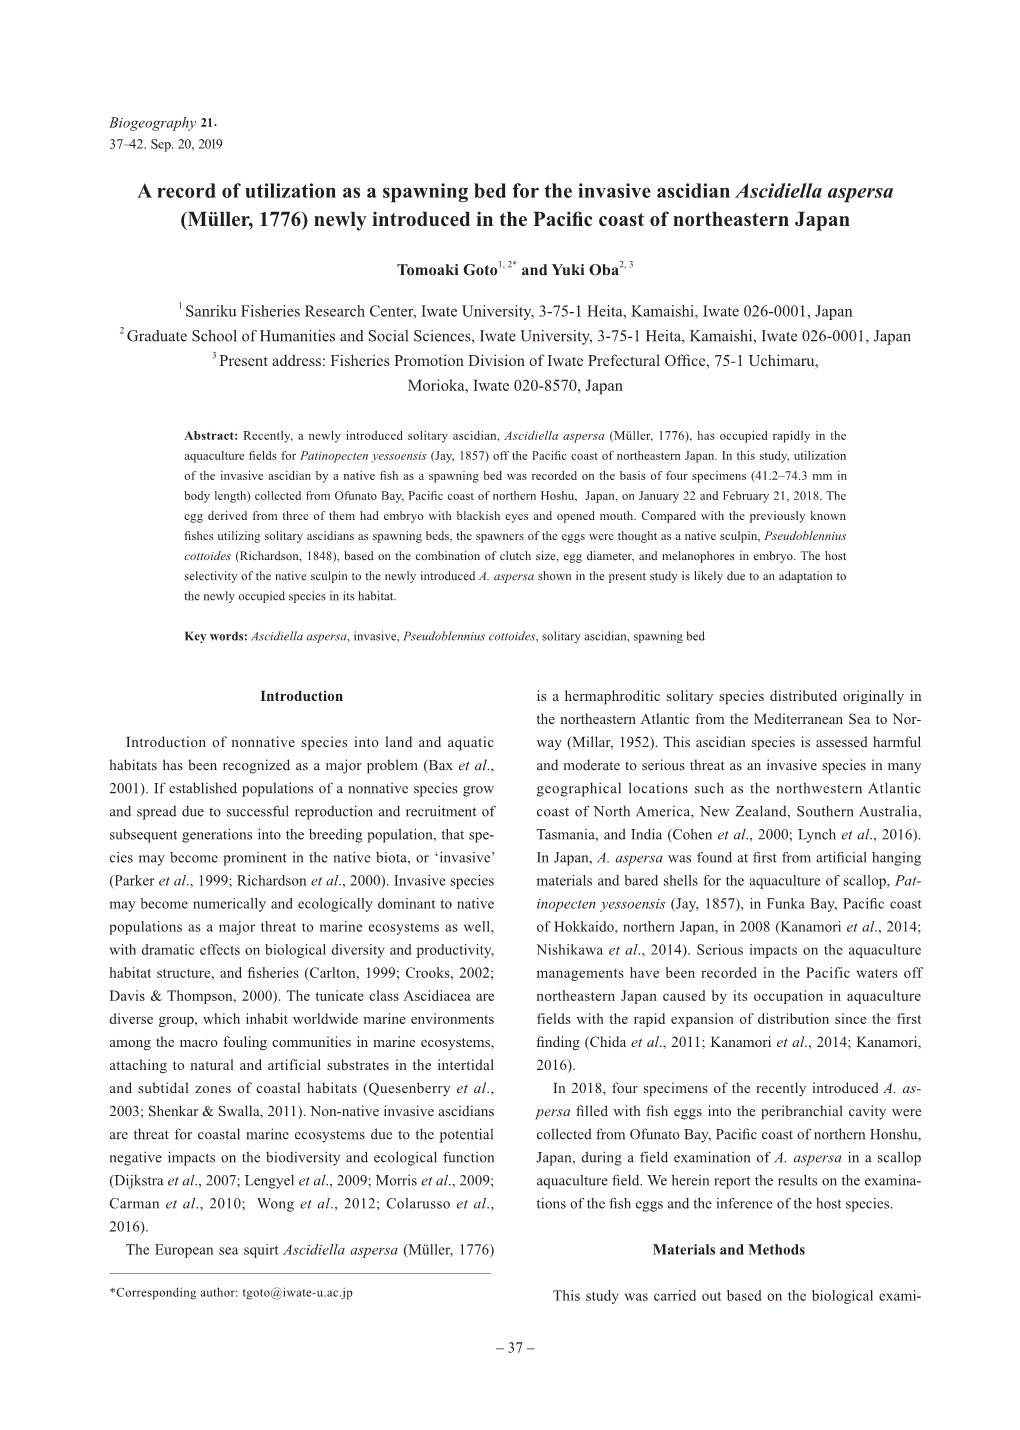 A Record of Utilization As a Spawning Bed for the Invasive Ascidian Ascidiella Aspersa (Müller, 1776) Newly Introduced in the Pacific Coast of Northeastern Japan